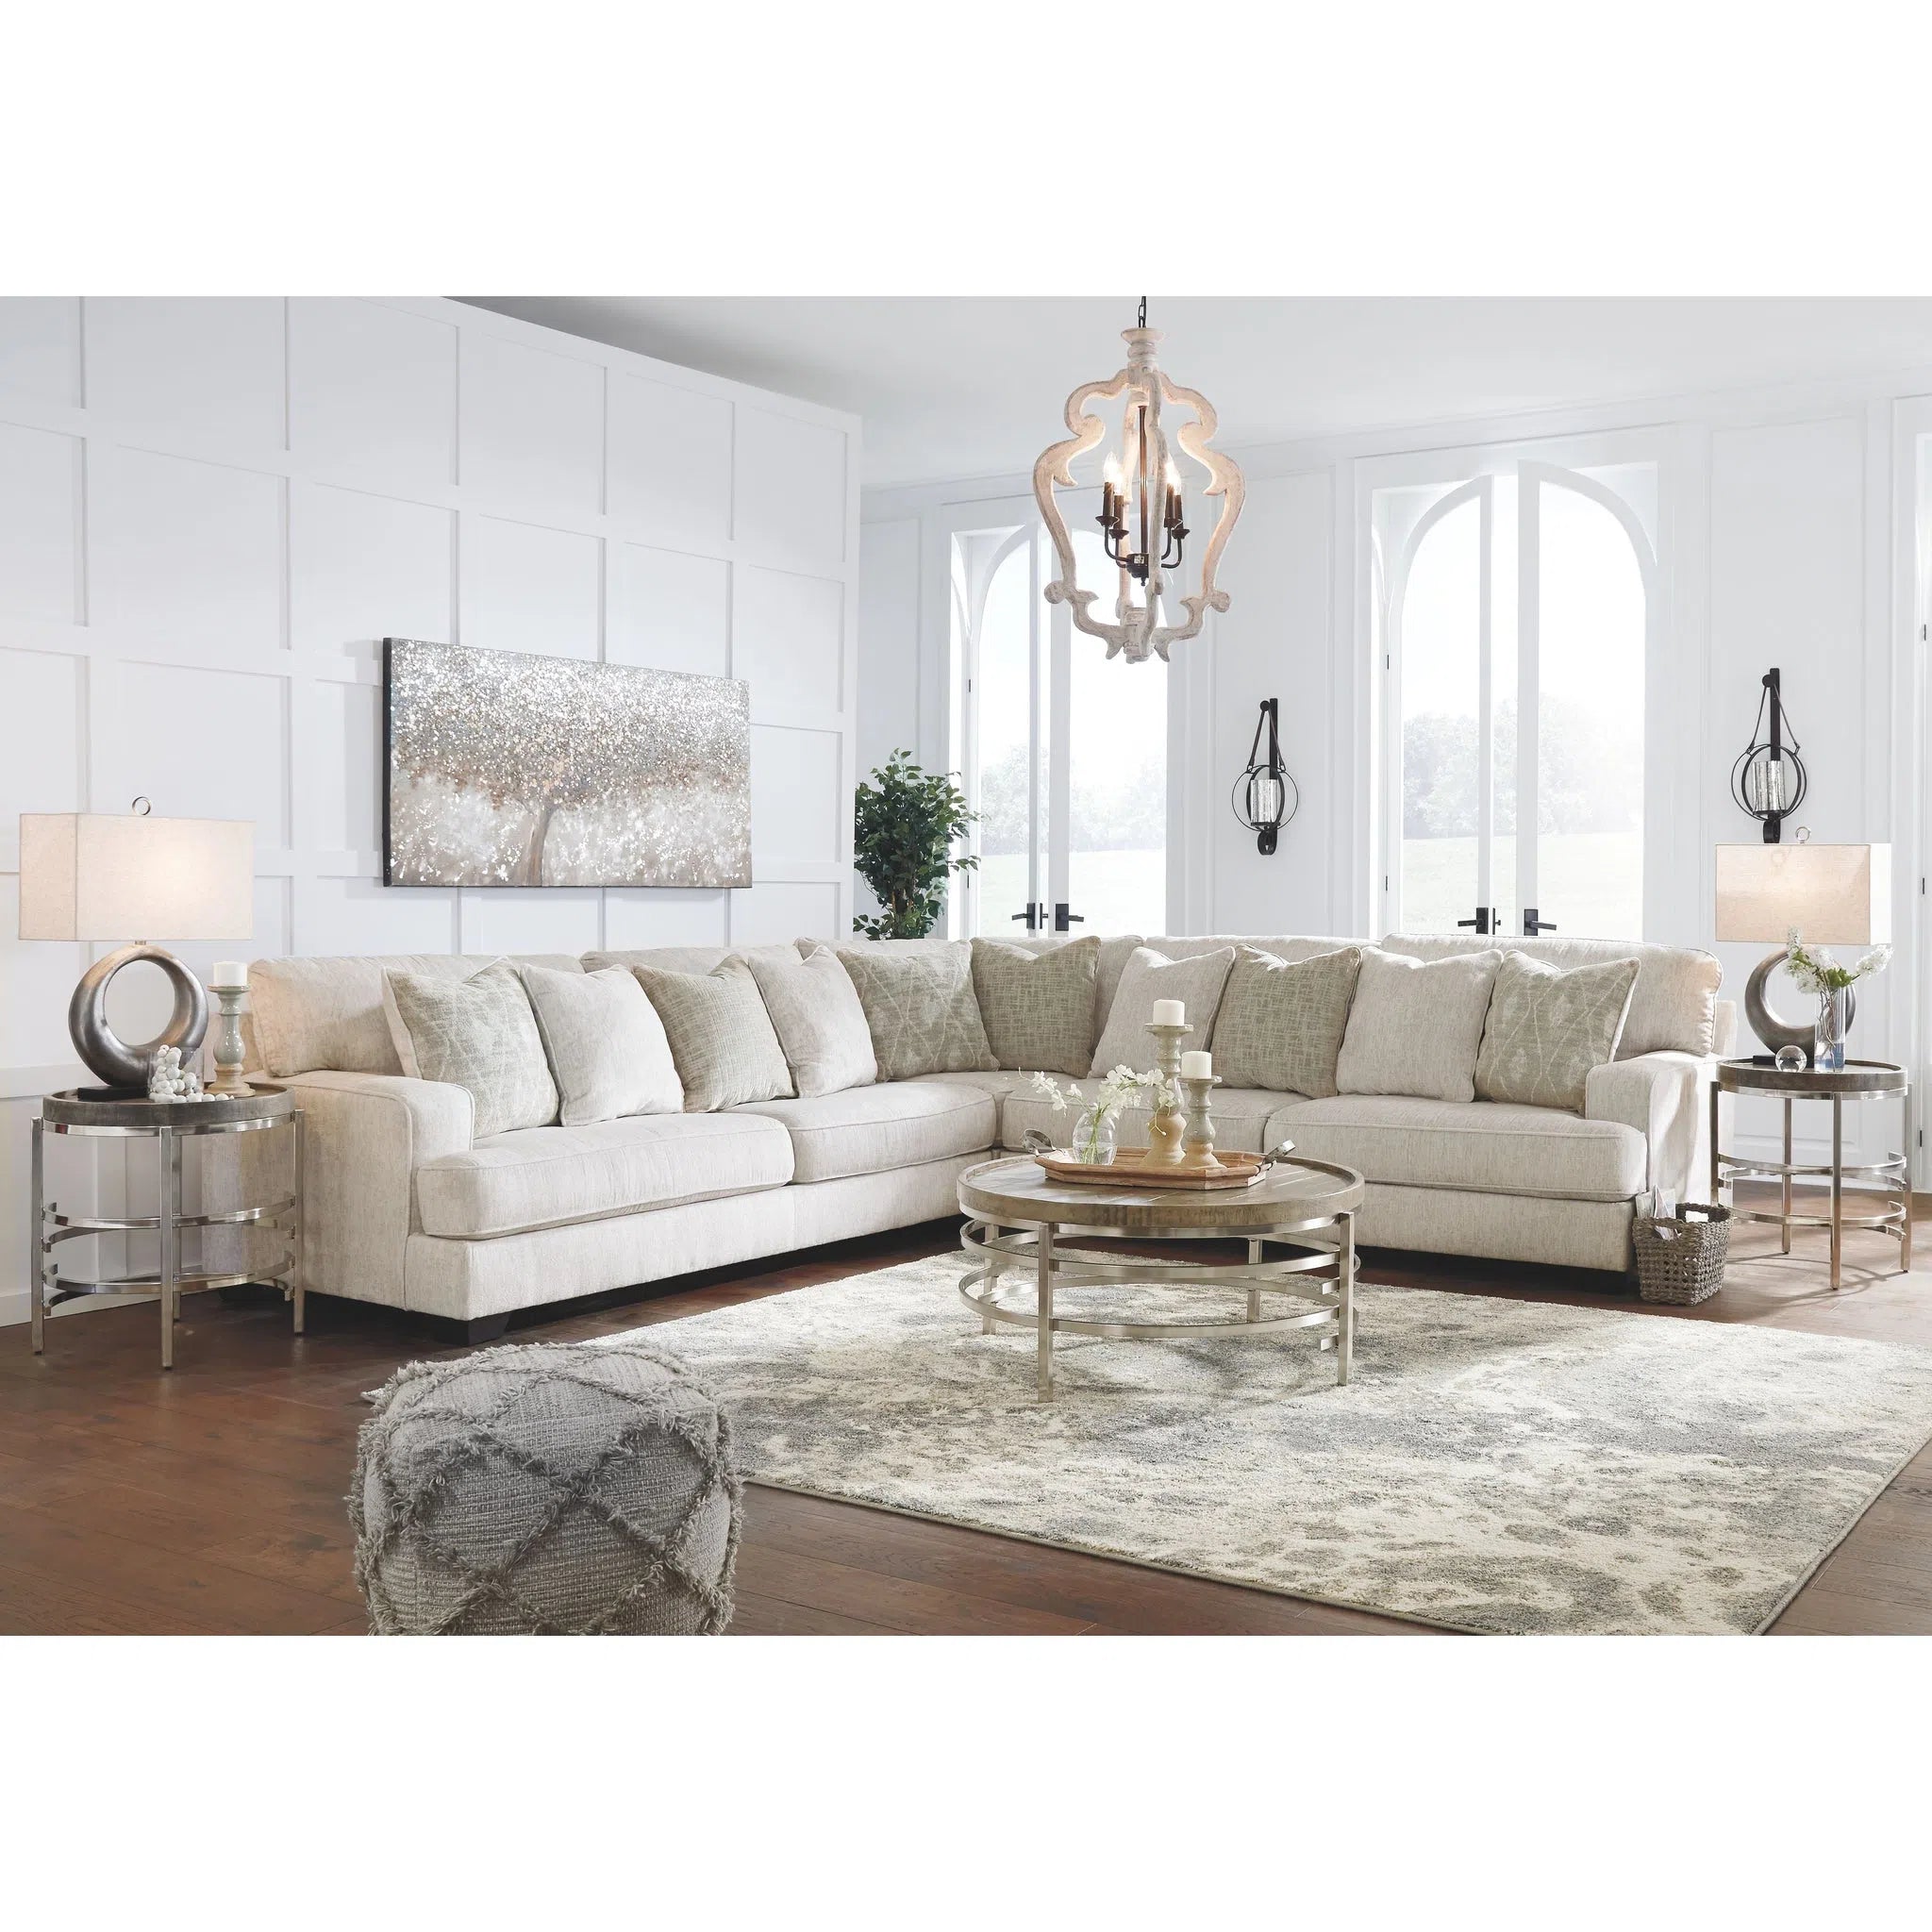 VIP Event: Up to 70% Off Furniture - Limited Time Only! | Calgary, AB